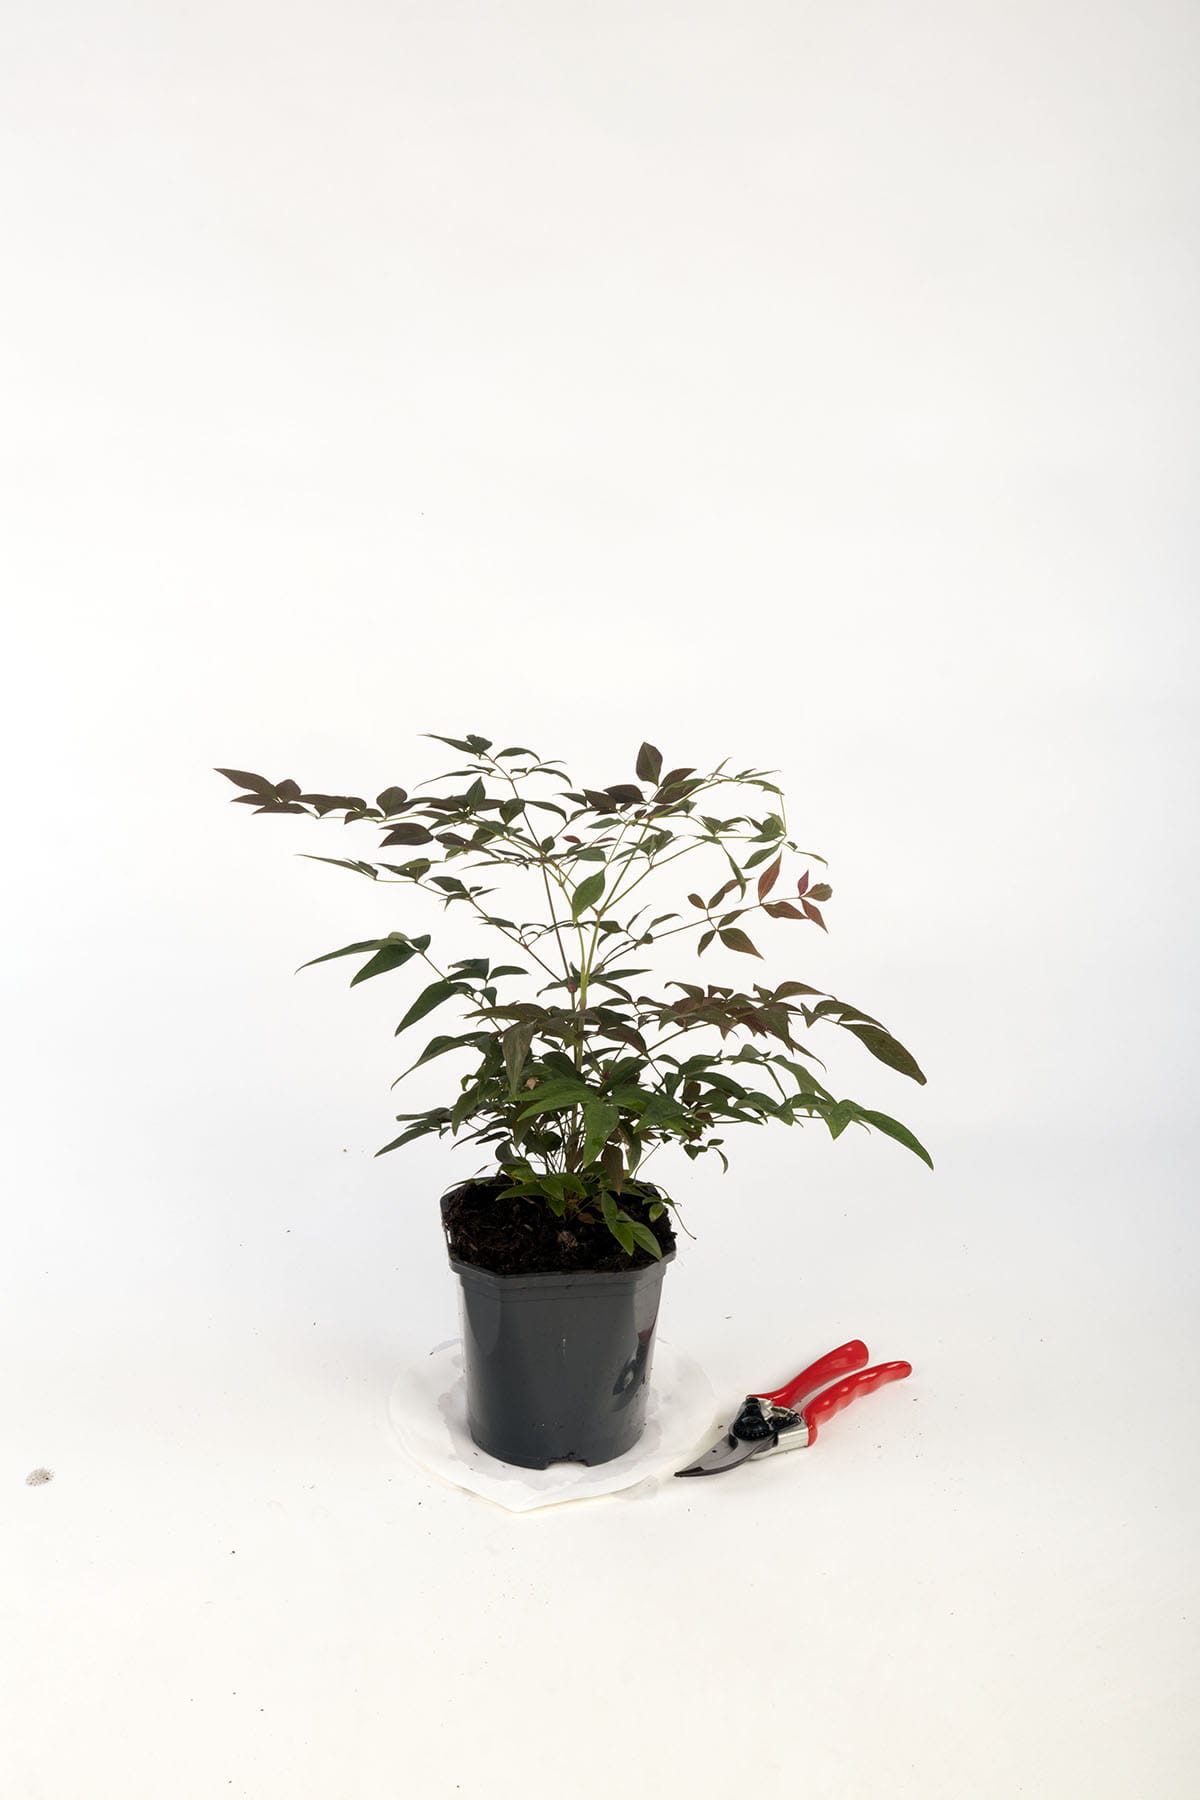 Heiliger Bambus 'Obsessed' • Nandina domestica 'Obsessed' Containerware 20-30 cm hoch Ansicht 1